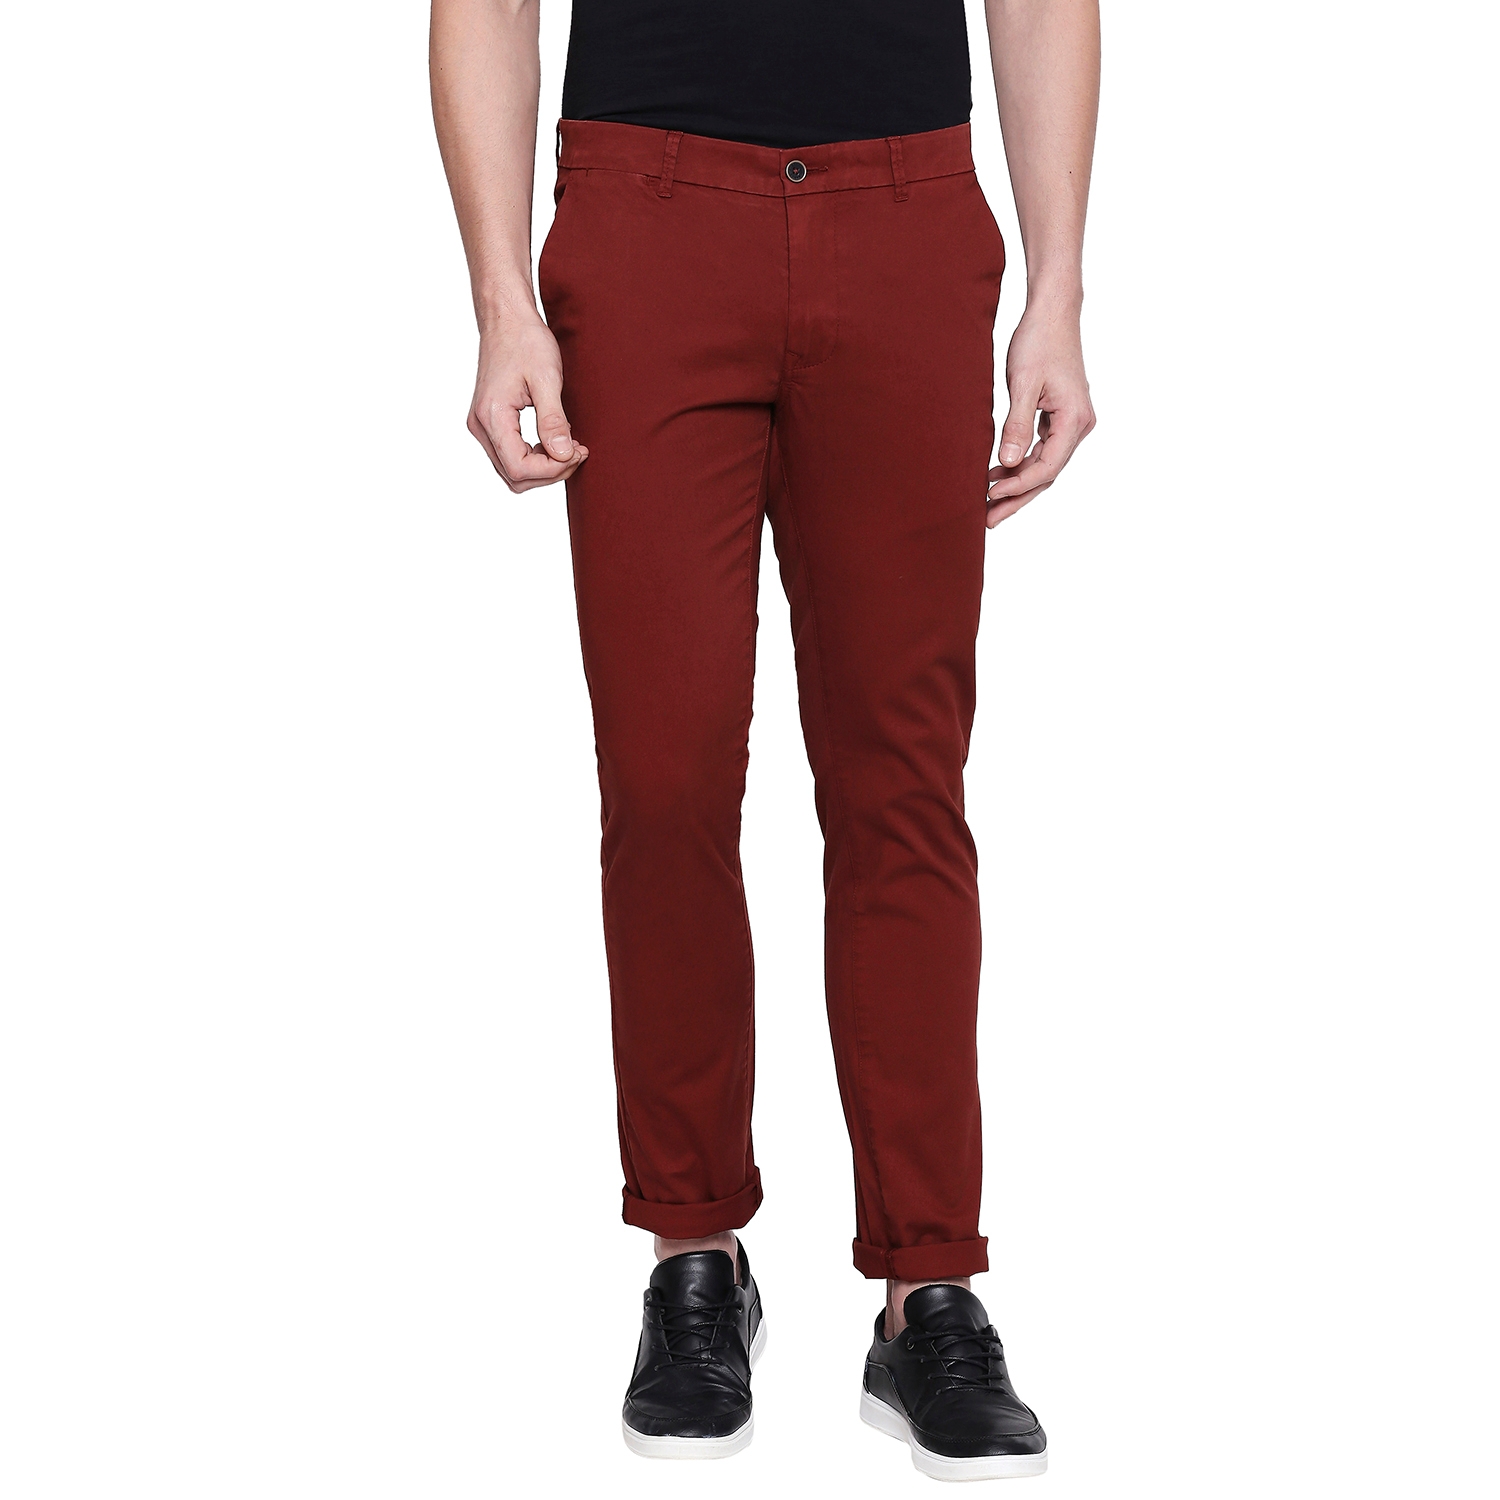 Basics | Basics Tapered Fit Sable Dyed Stretch Trouser